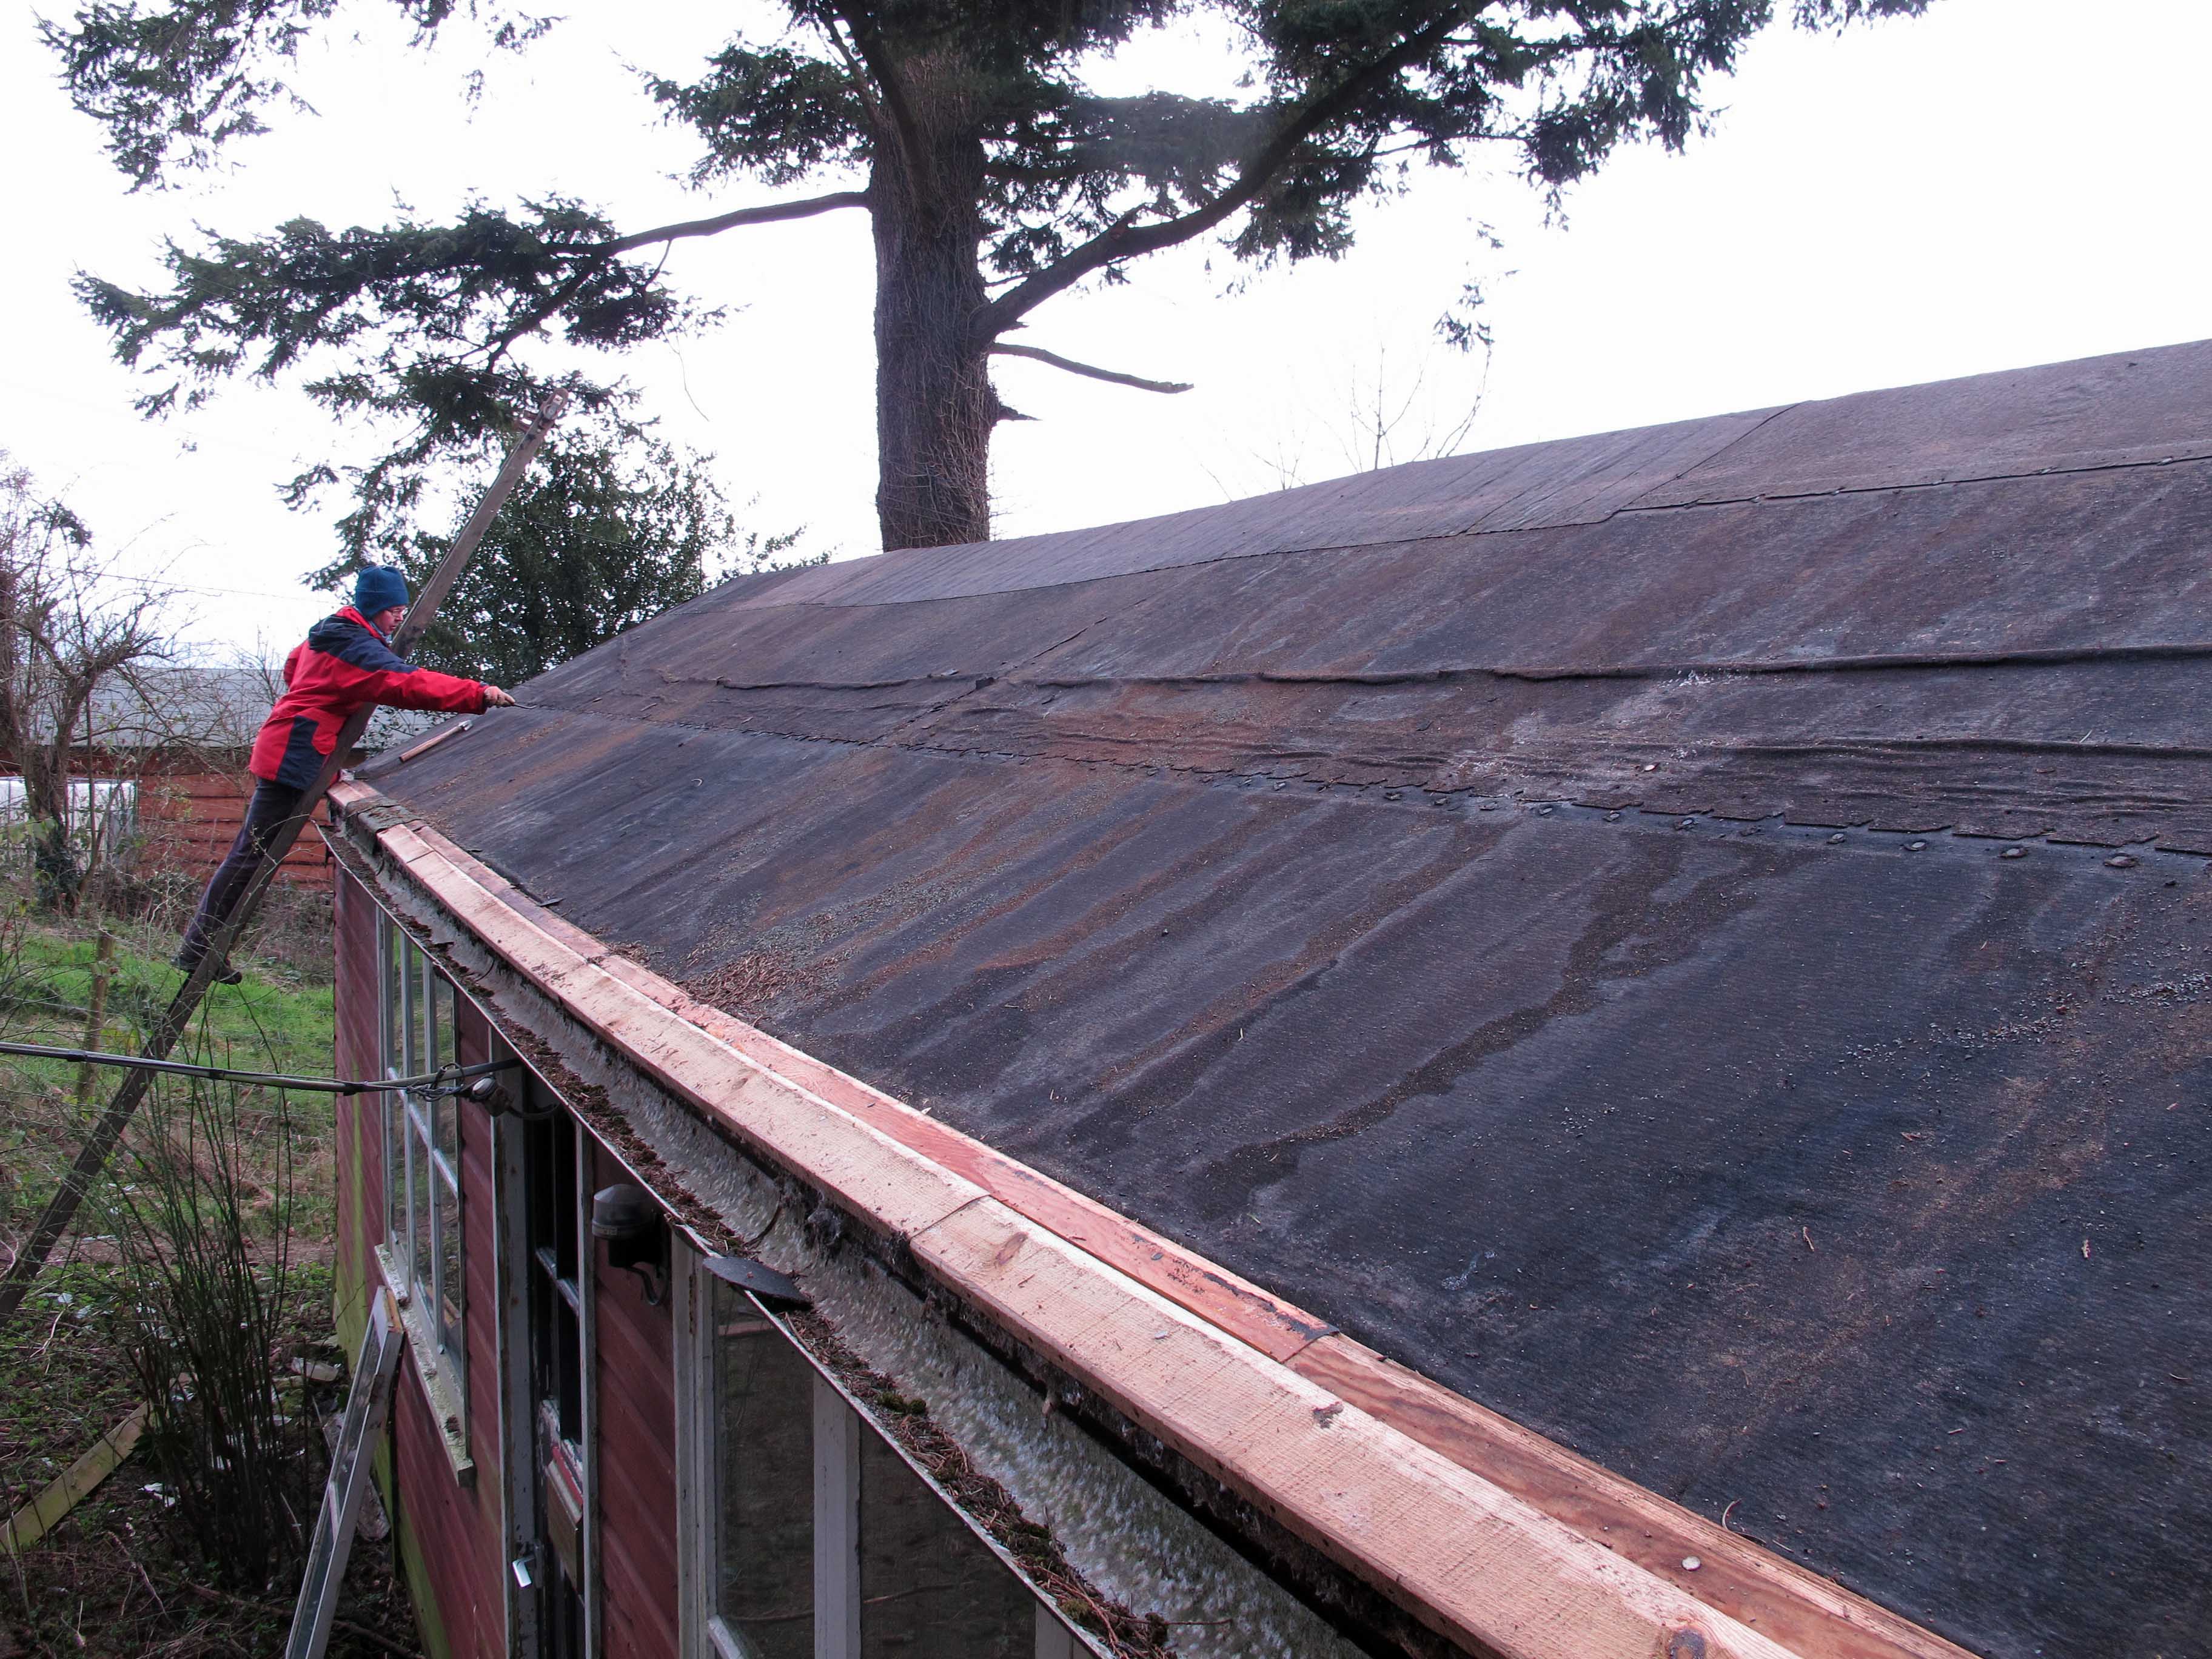 deara: Useful How to refelt a shed roof